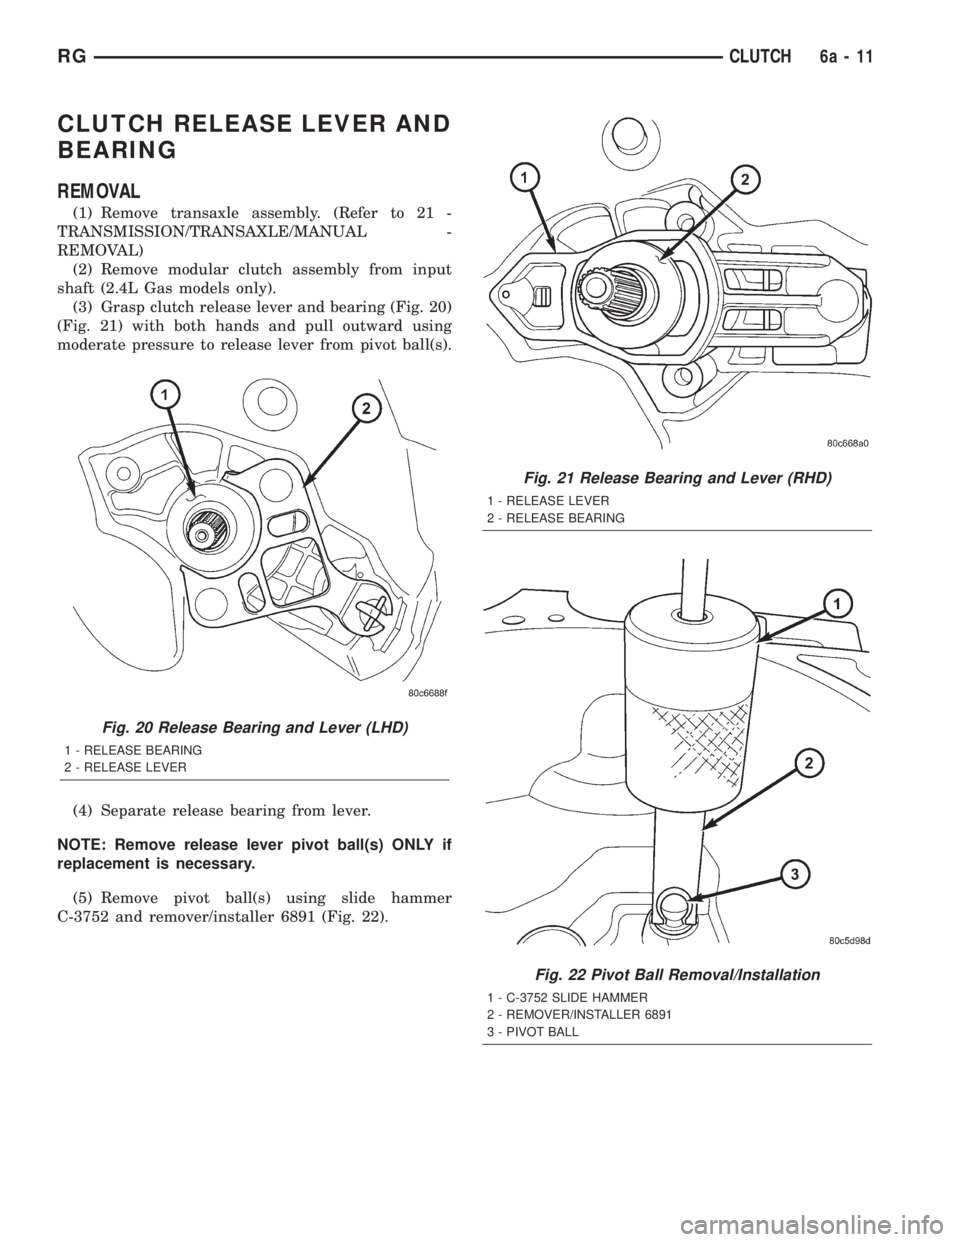 CHRYSLER VOYAGER 2001  Service Manual CLUTCH RELEASE LEVER AND
BEARING
REMOVAL
(1) Remove transaxle assembly. (Refer to 21 -
TRANSMISSION/TRANSAXLE/MANUAL -
REMOVAL)
(2) Remove modular clutch assembly from input
shaft (2.4L Gas models onl